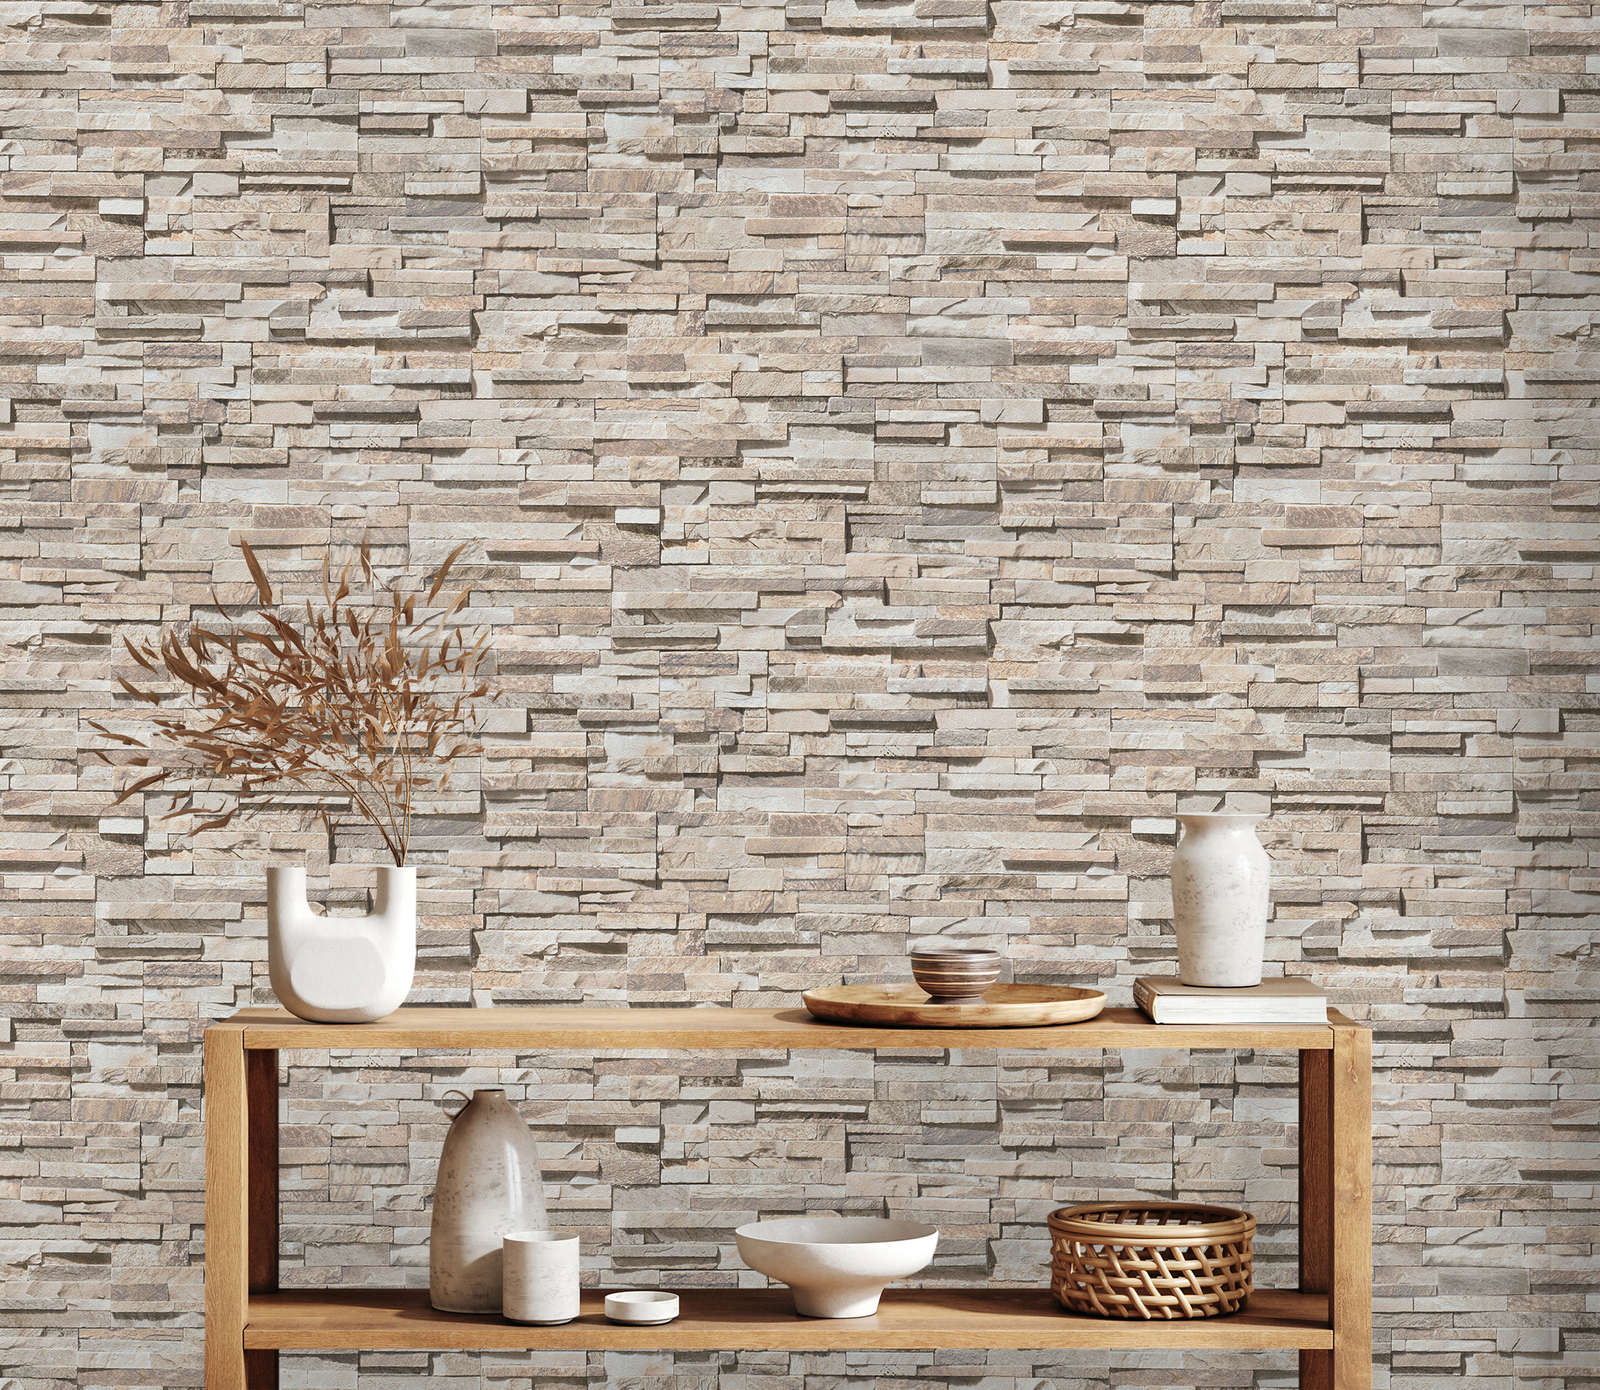             Slightly glossy non-woven wallpaper with stone wall look - beige, brown
        